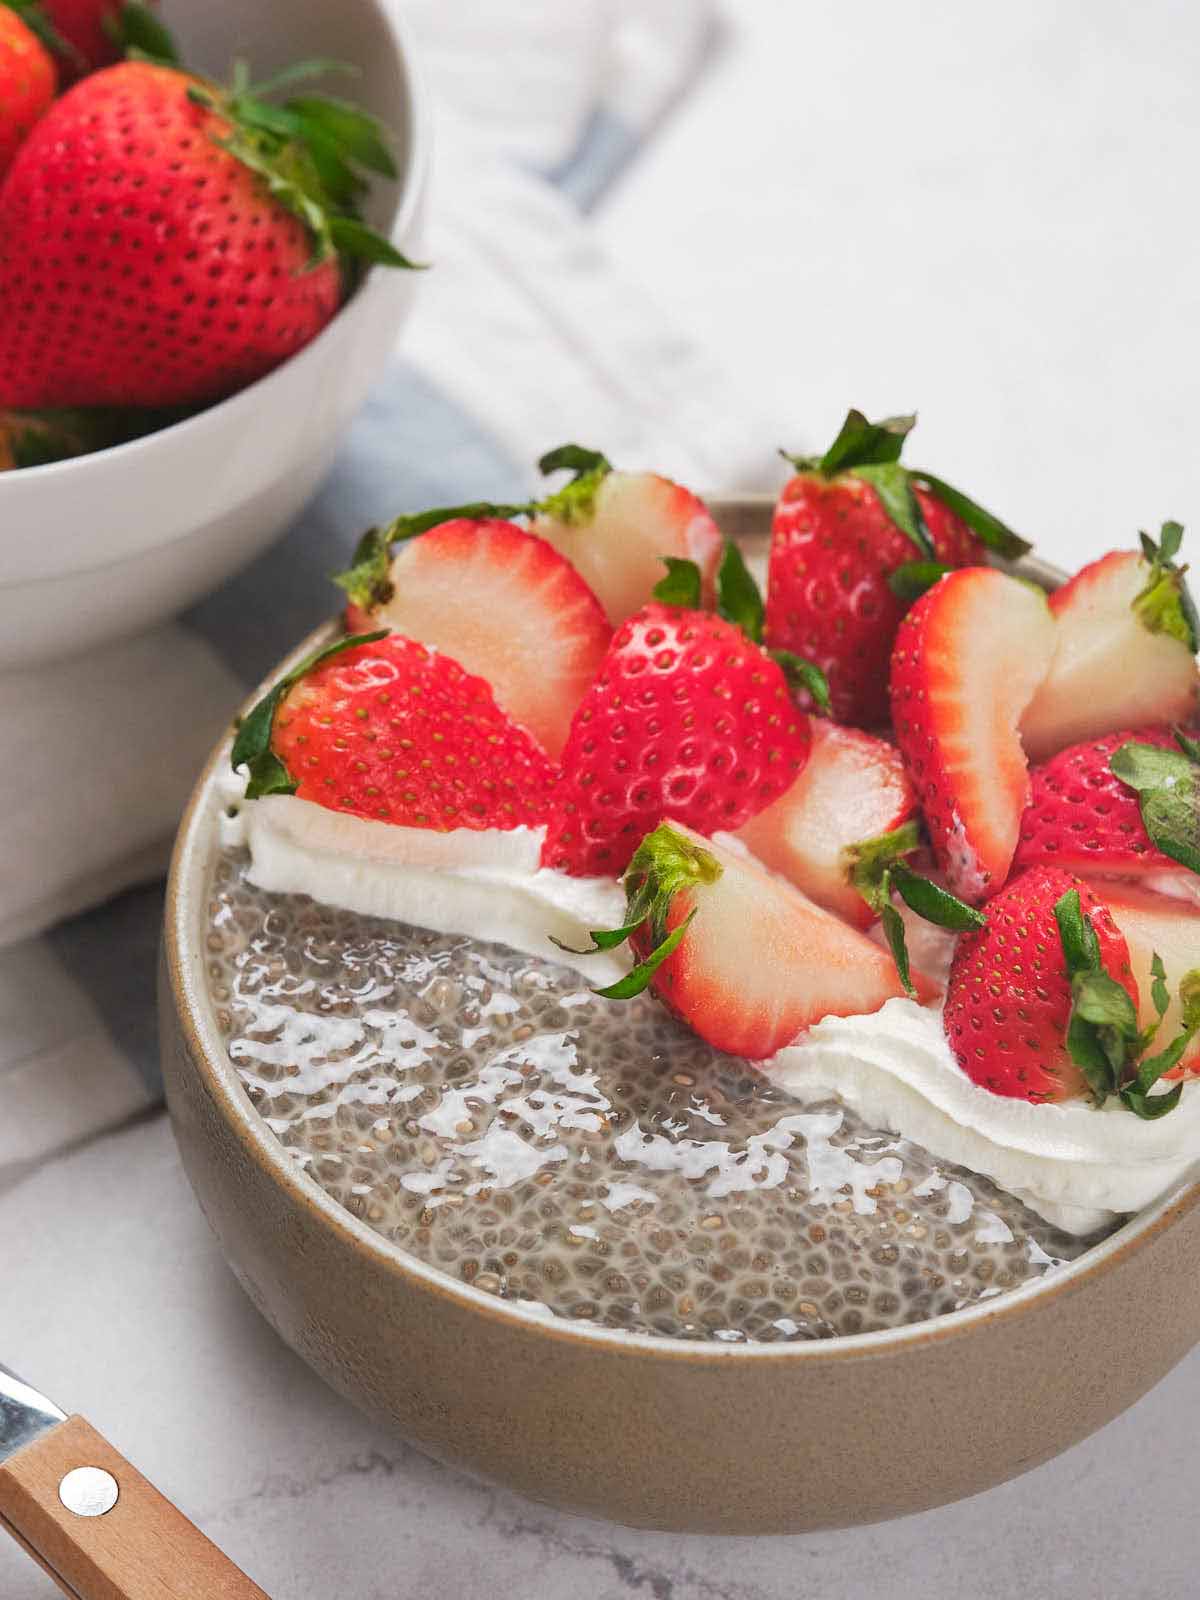 A bowl of chia seed pudding topped with whipped cream and sliced strawberries.